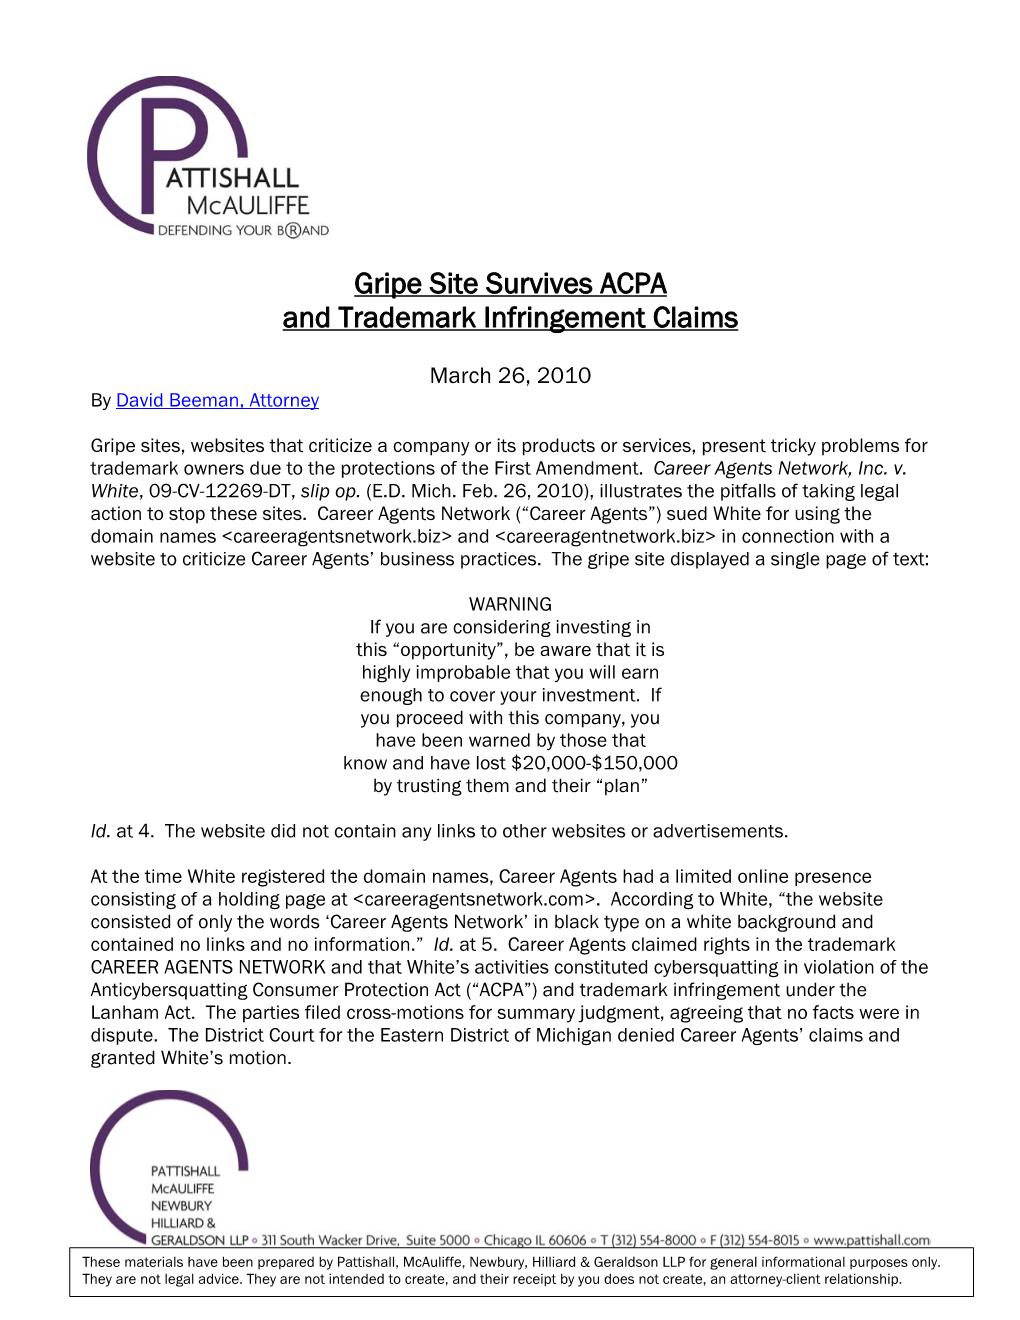 Gripe Site Survives ACPA and Trademark Infringement Claims